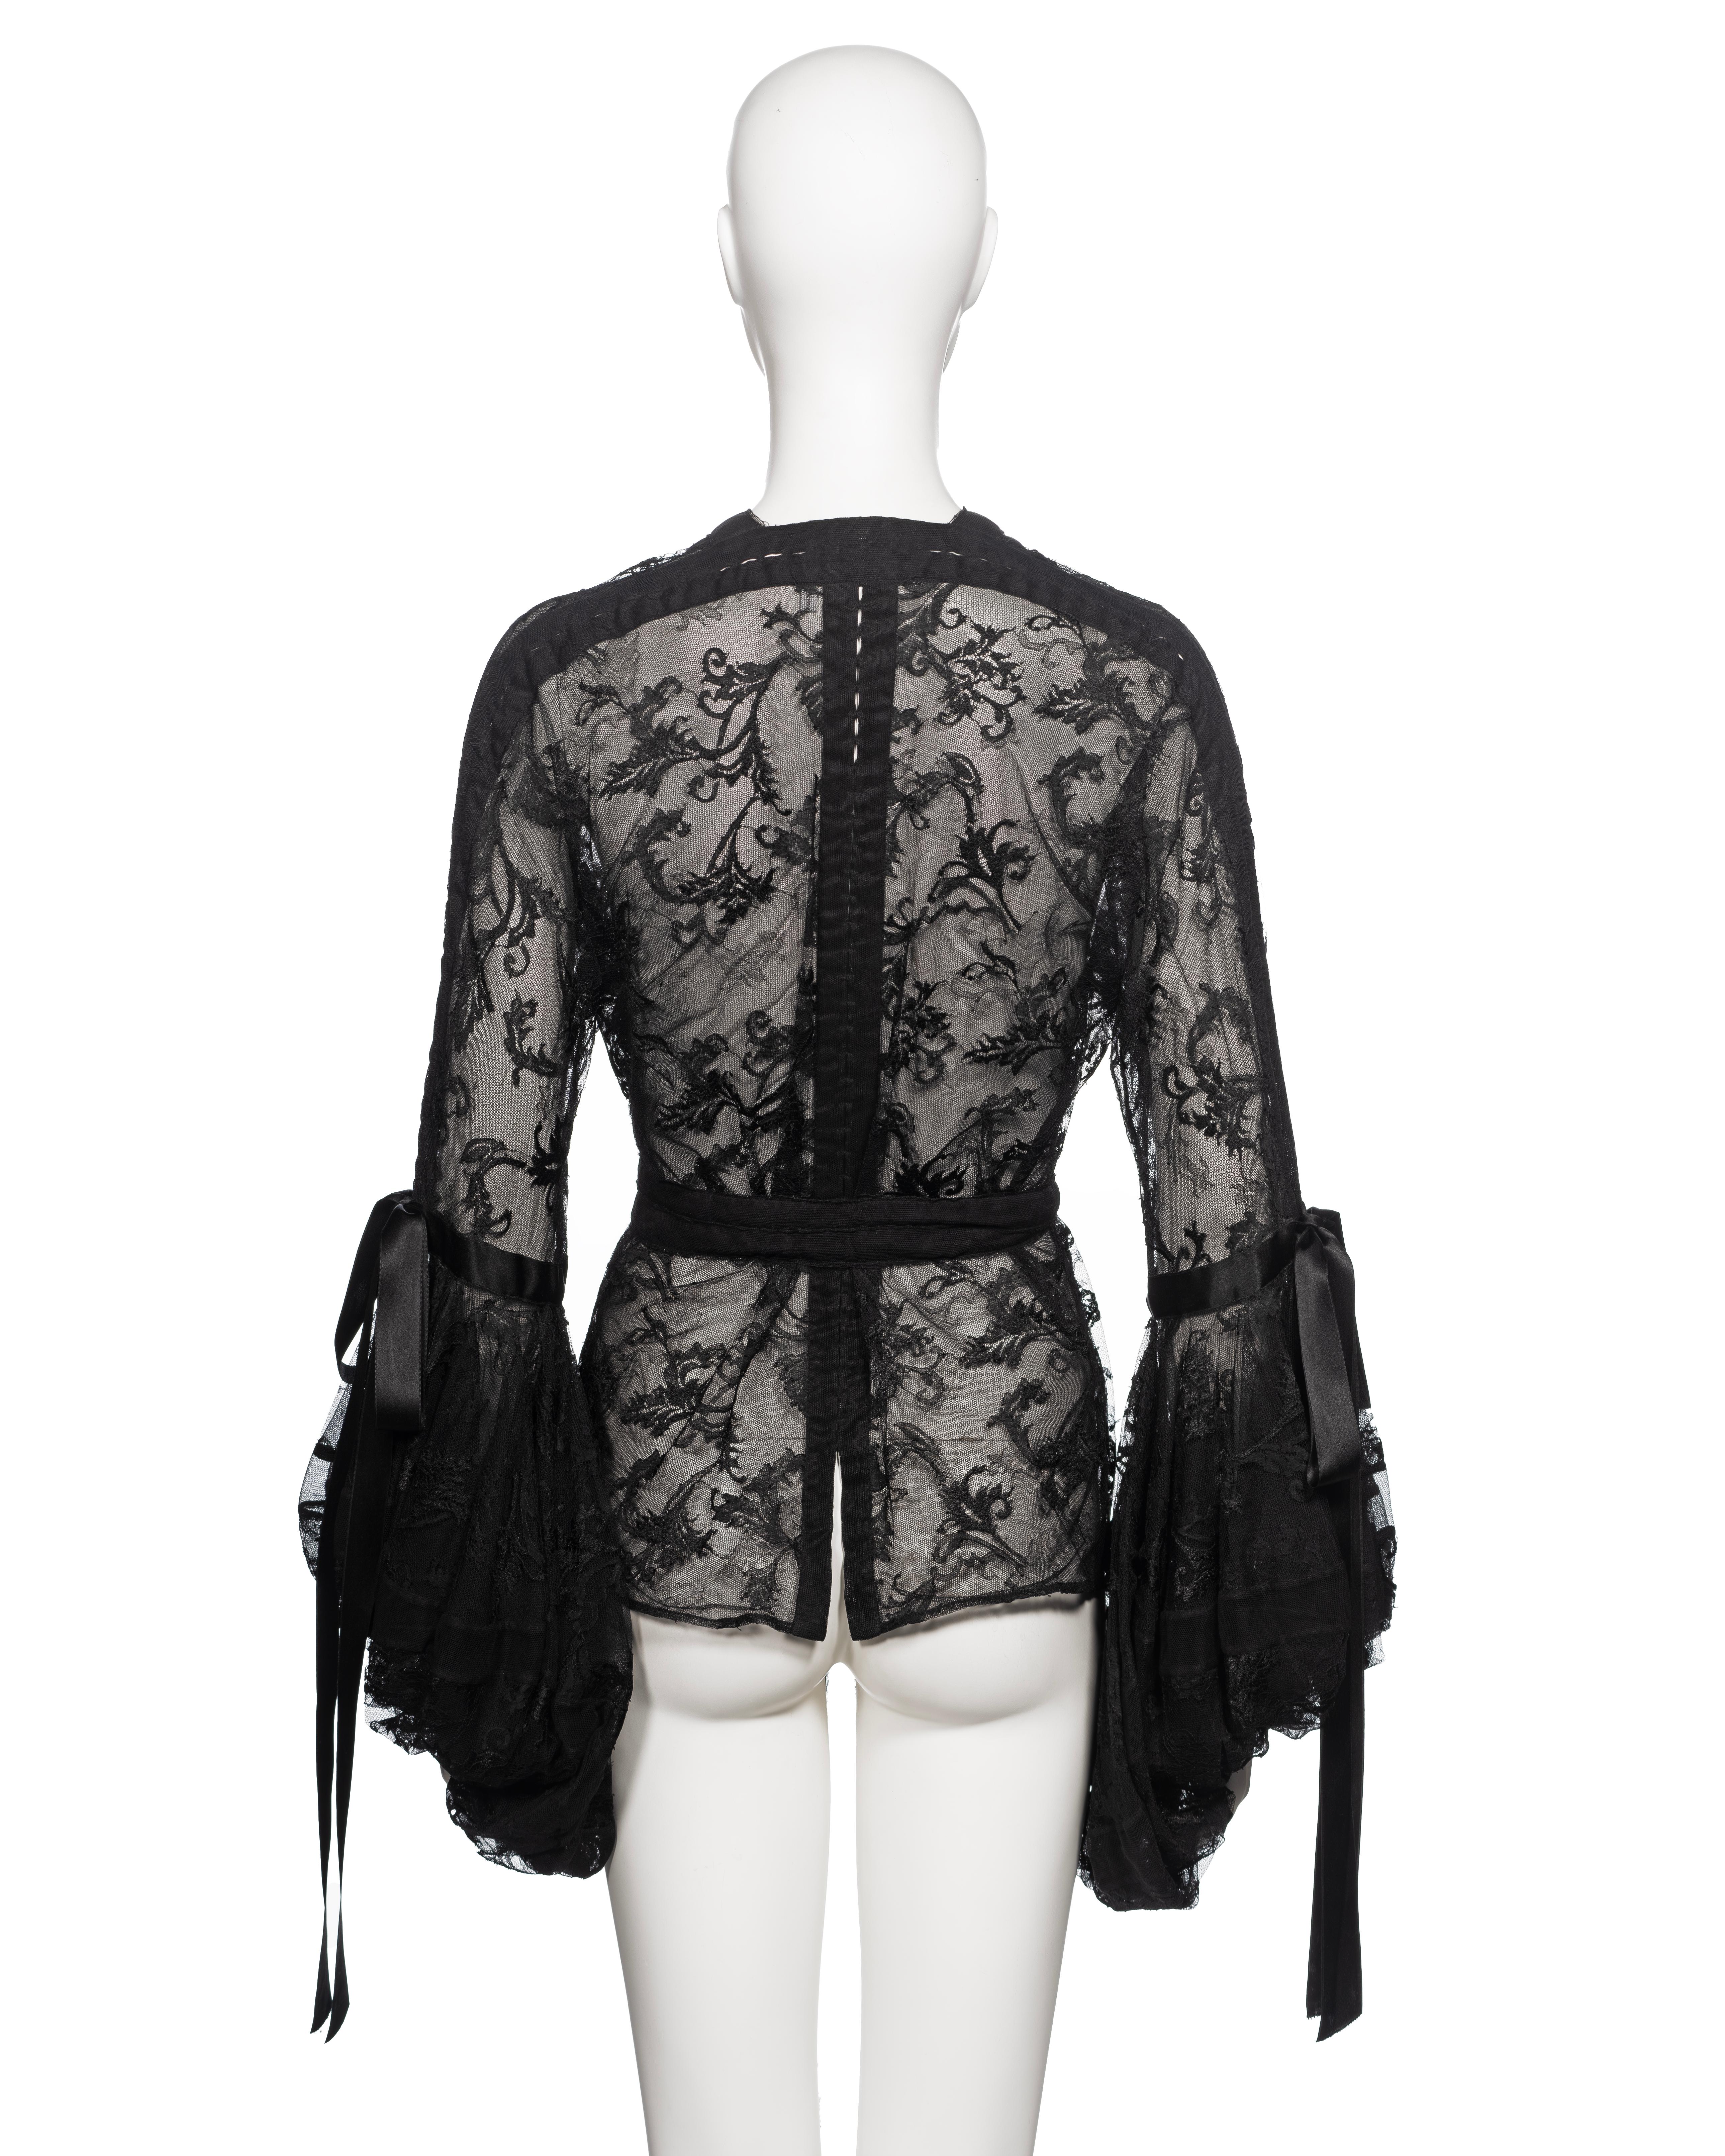 Yves Saint Laurent by Tom Ford Black Lace and Silk Ribbon Blouse, FW 2002 For Sale 5